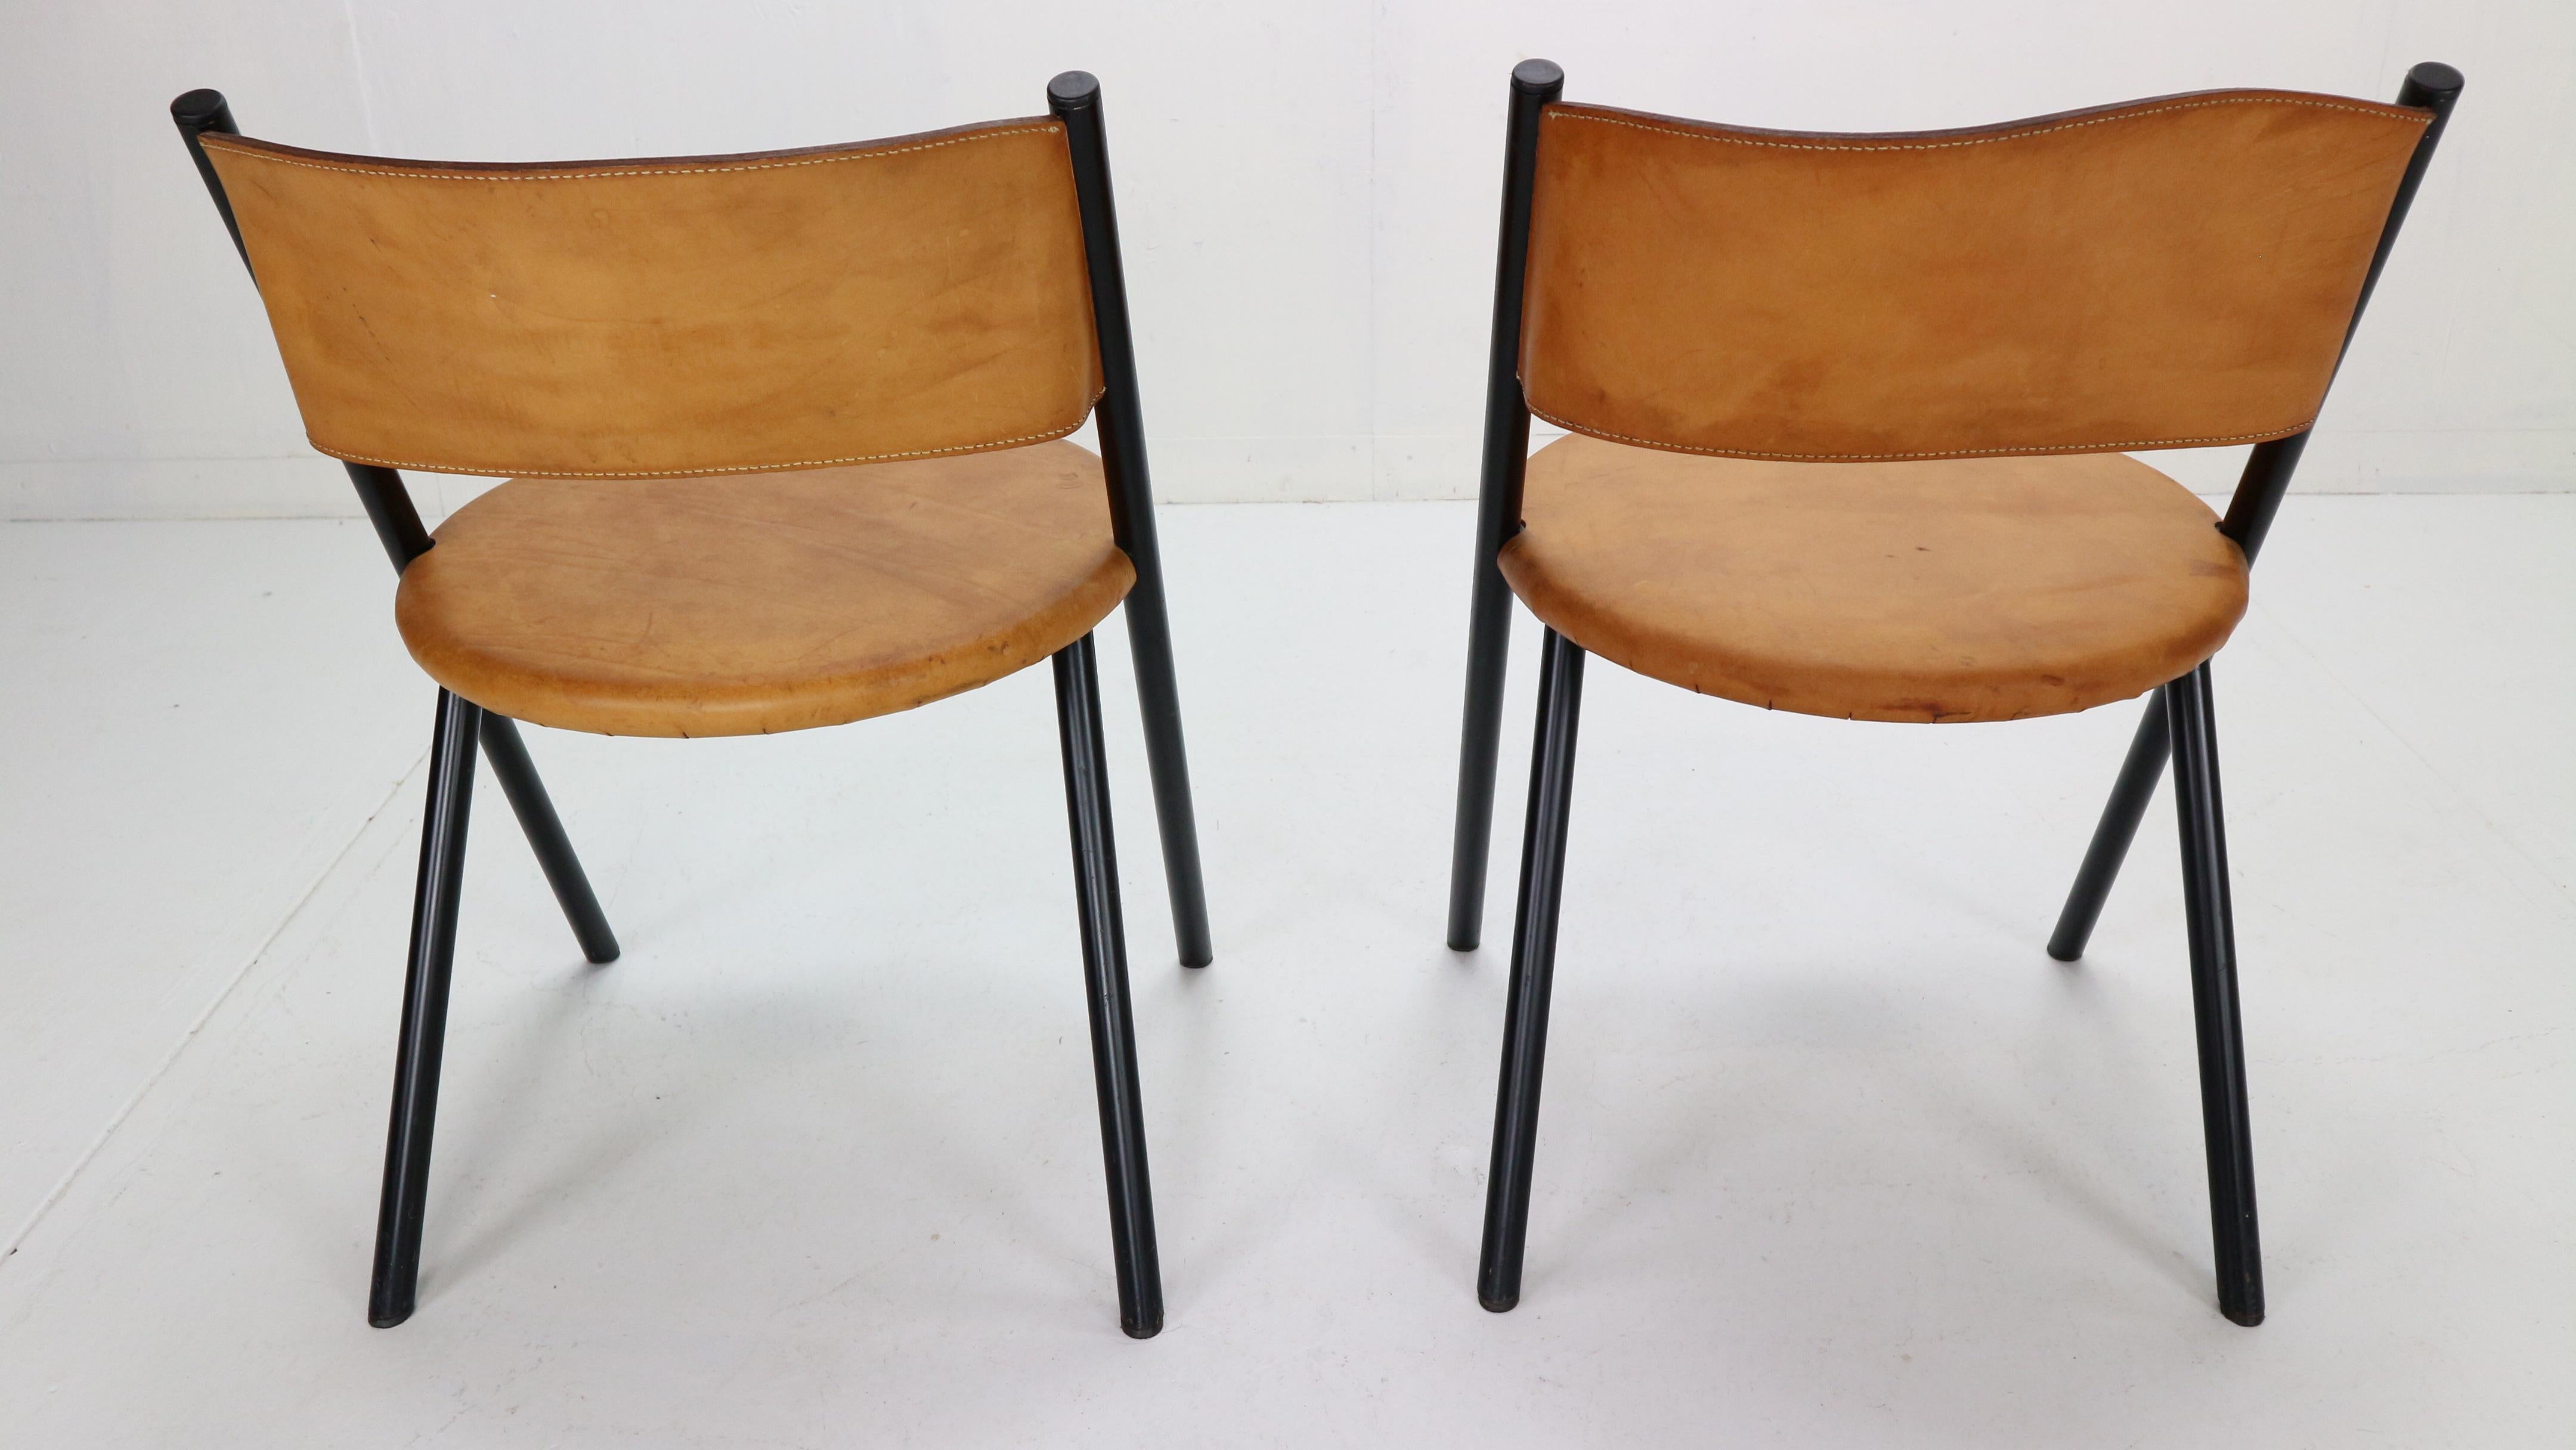 Metal Mid-Century Modern Set of 2 Cognac Leather Chairs, 1970s, Italy